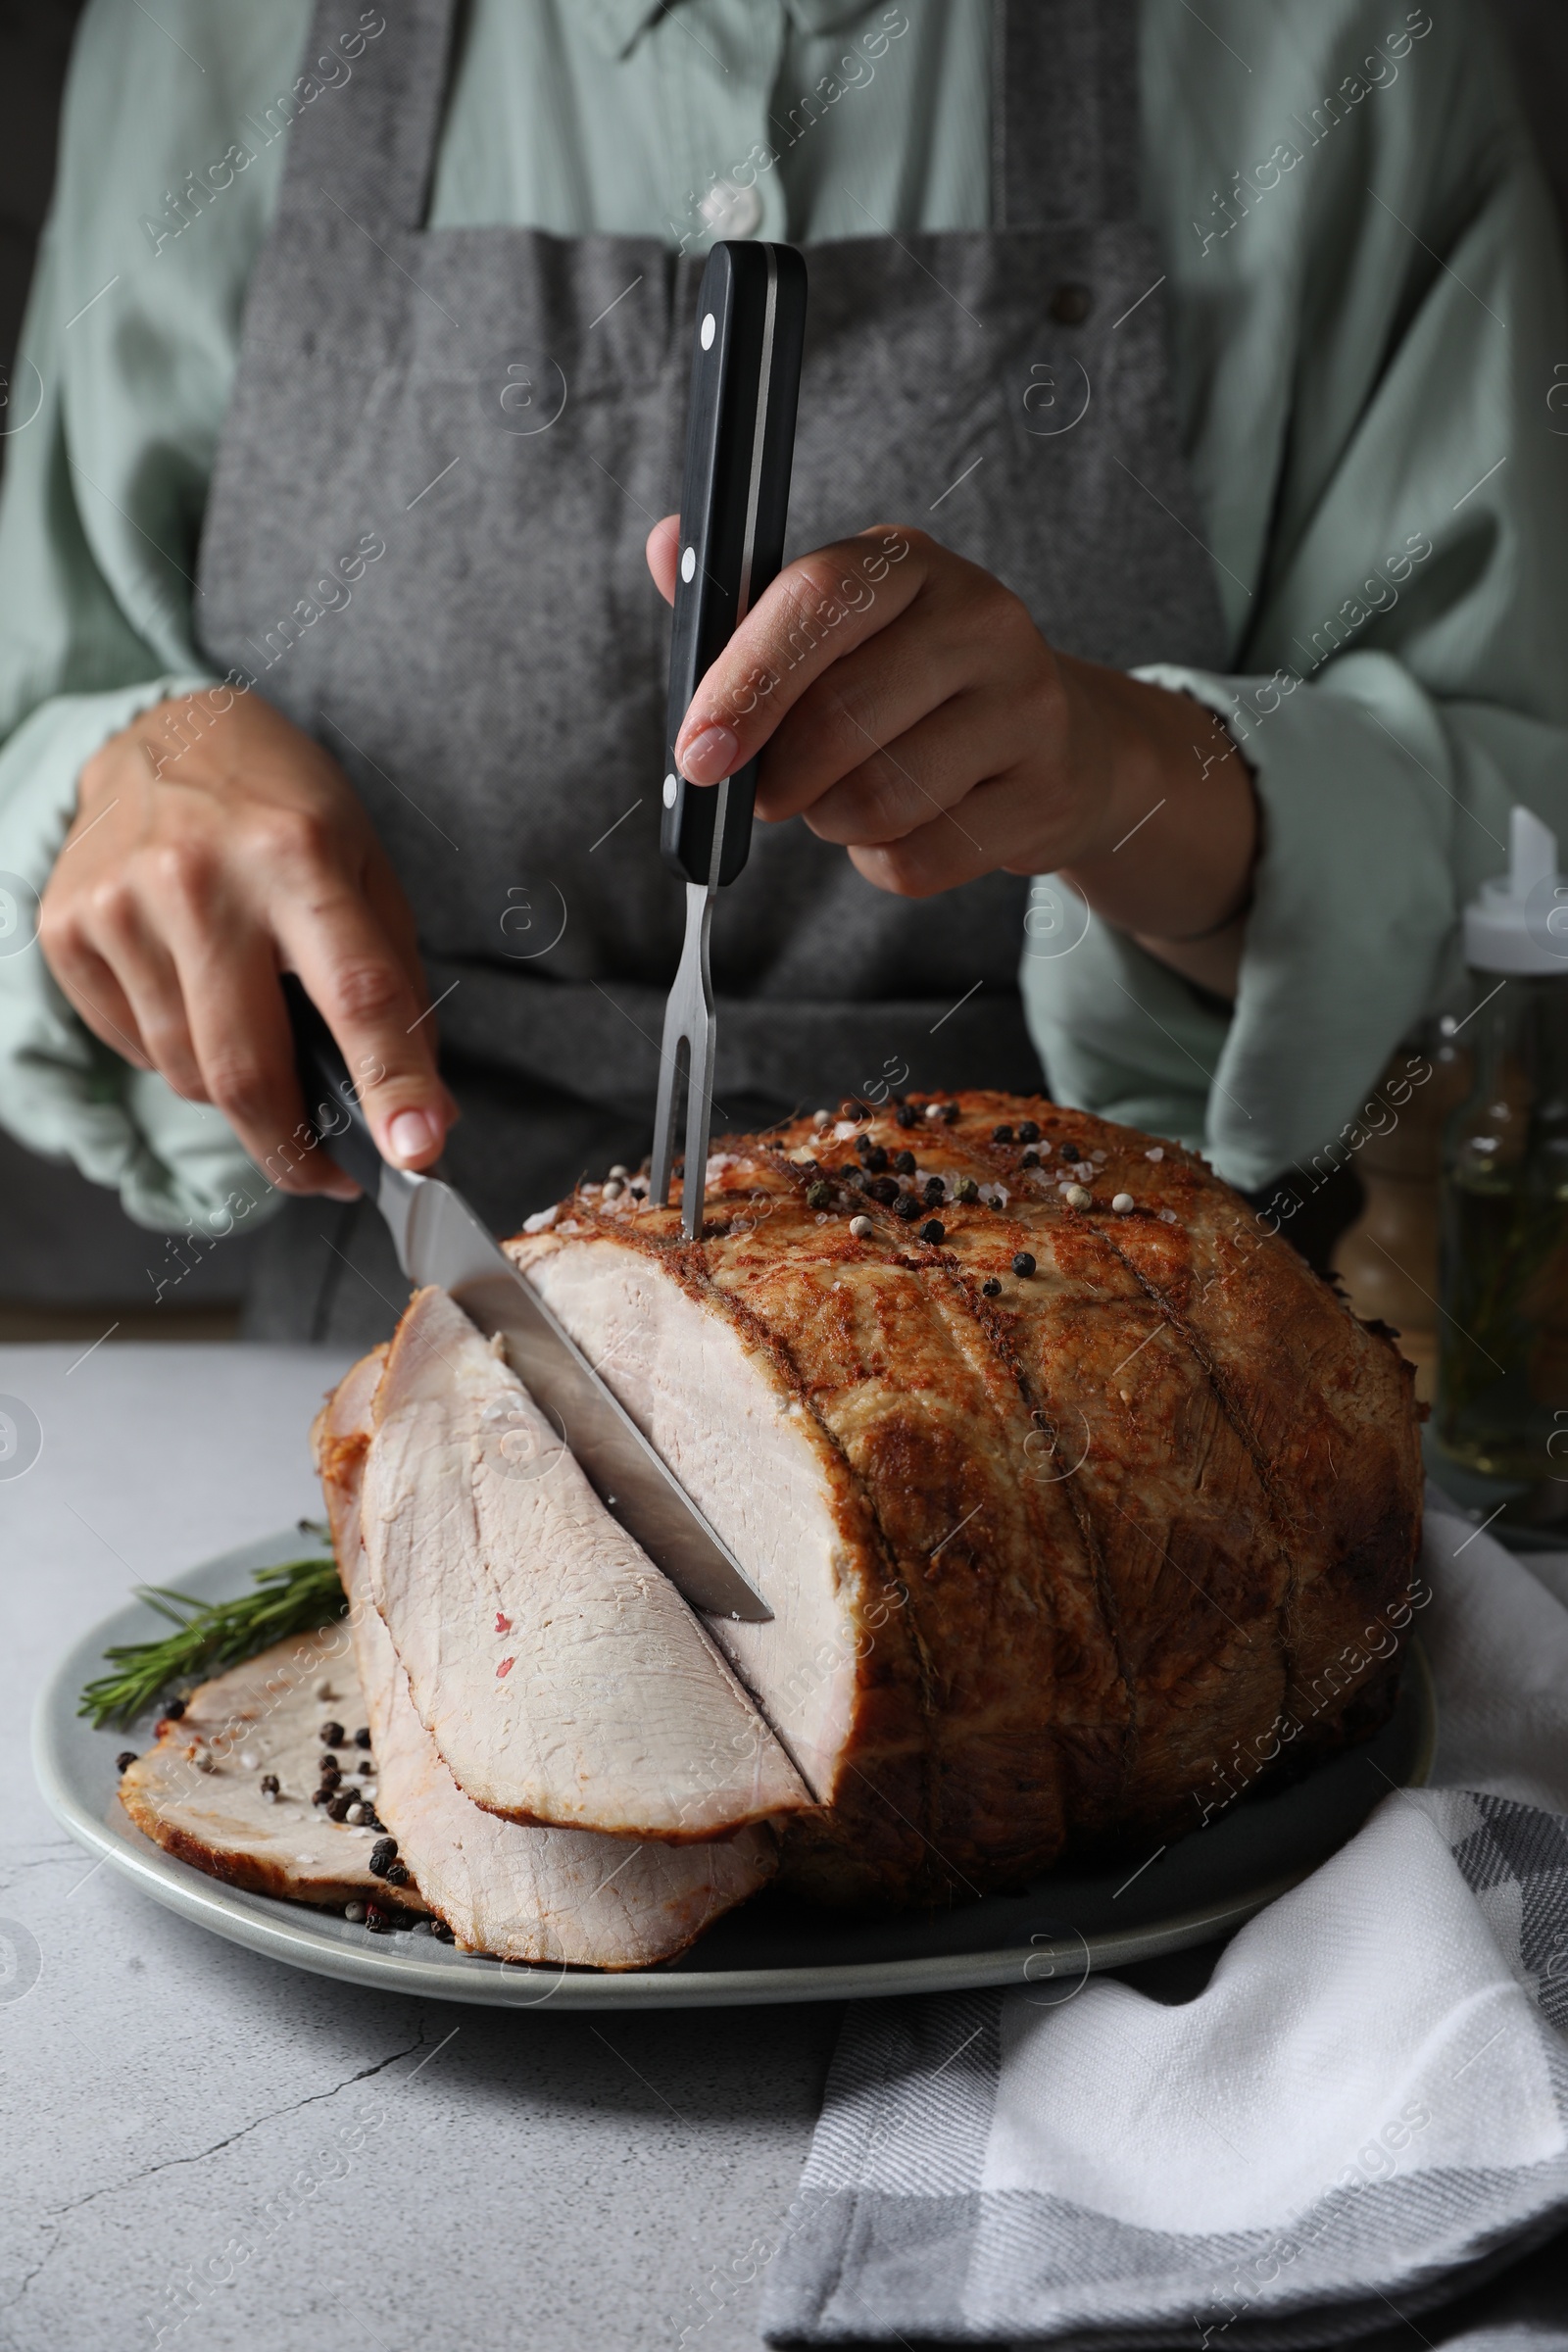 Photo of Woman cutting delicious baked ham at wooden table, closeup